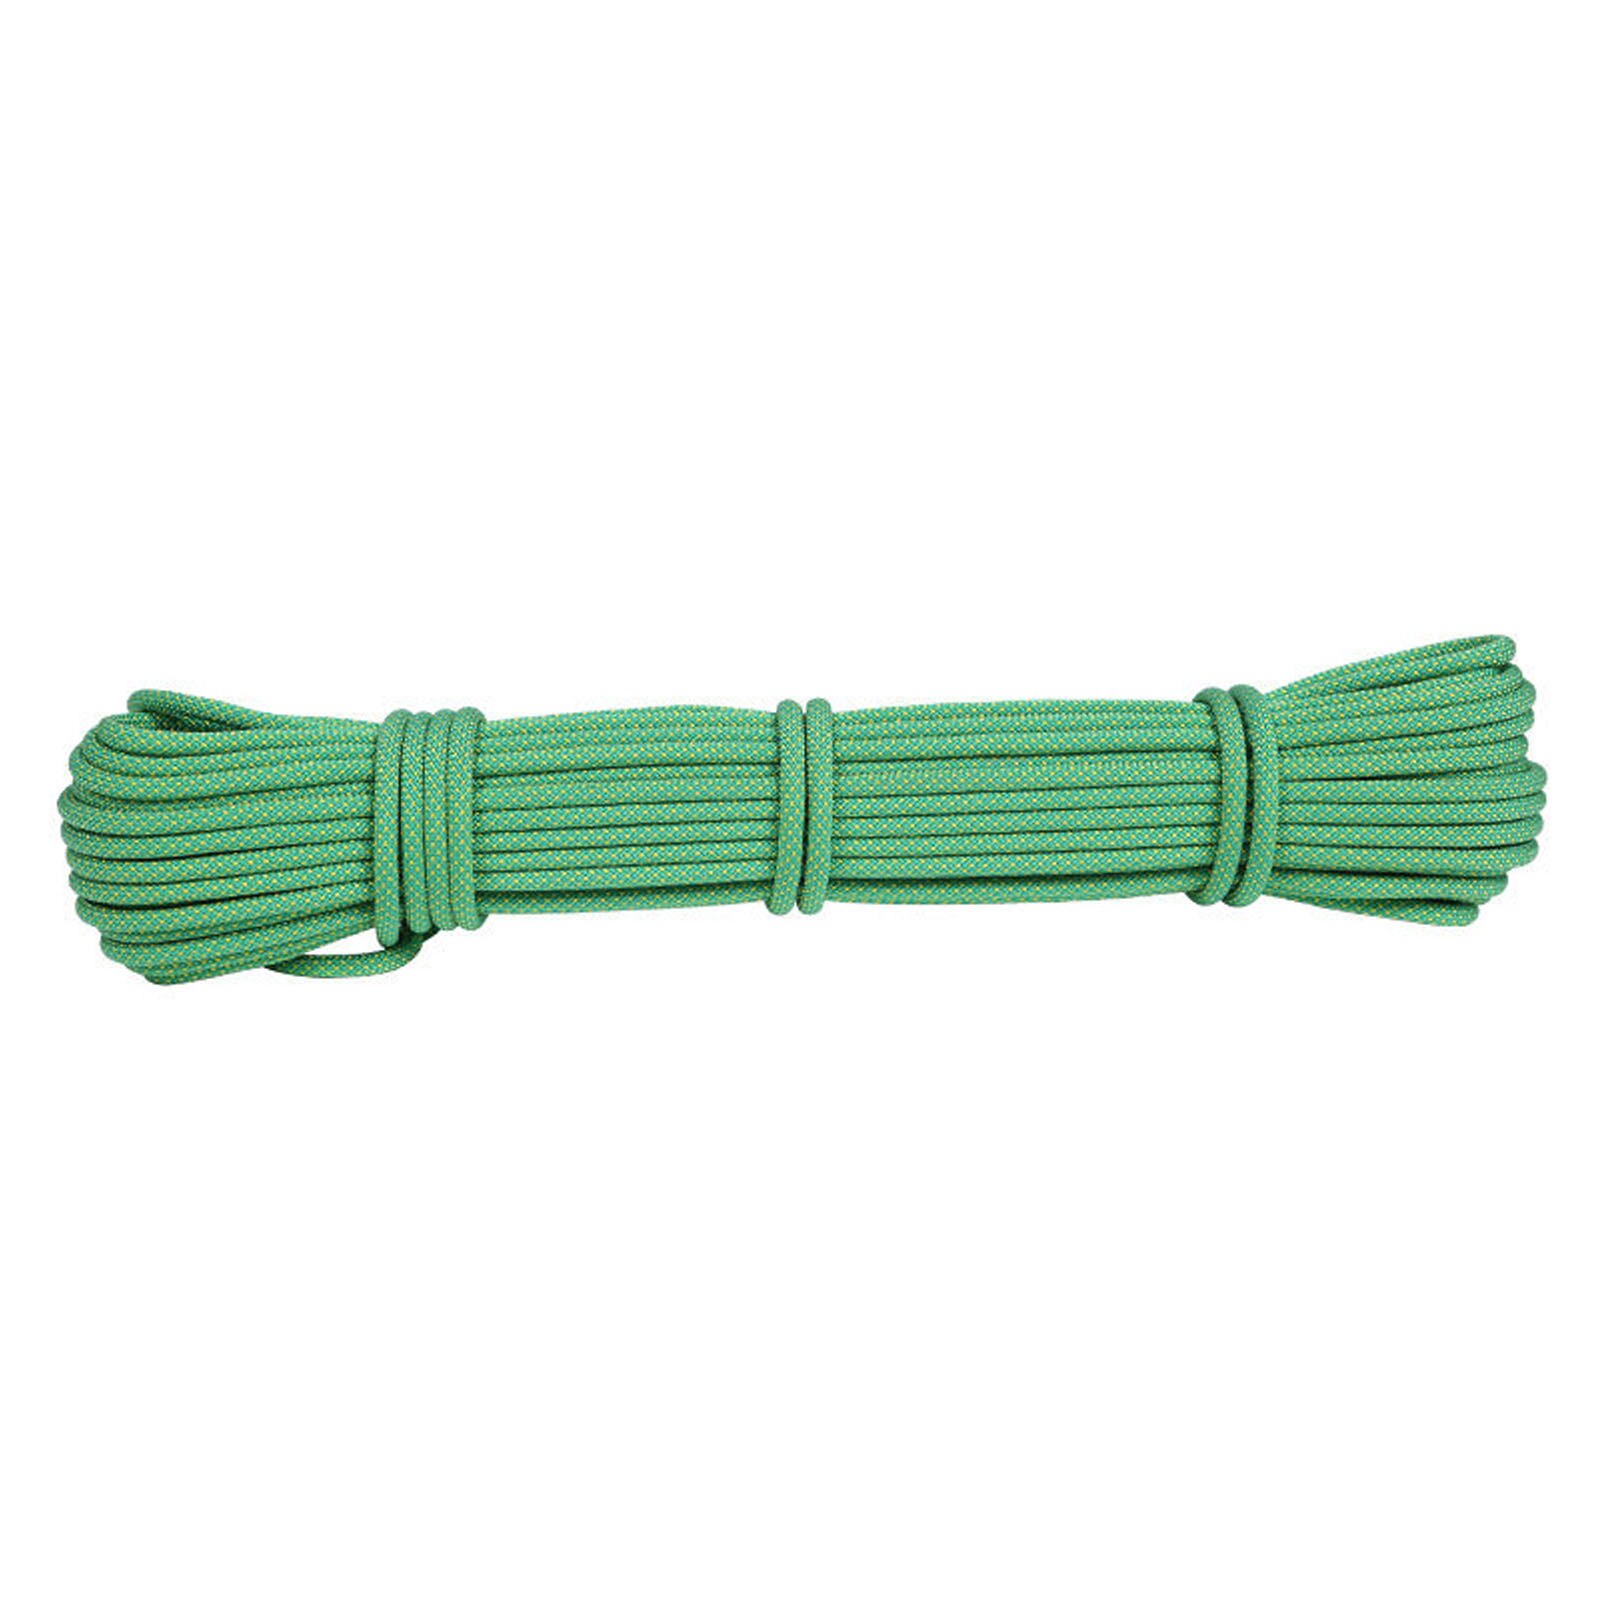 6mm*30M Outdoor Safety Mountaineering Rock Climbing Rope Rescue Auxiliary Cord 